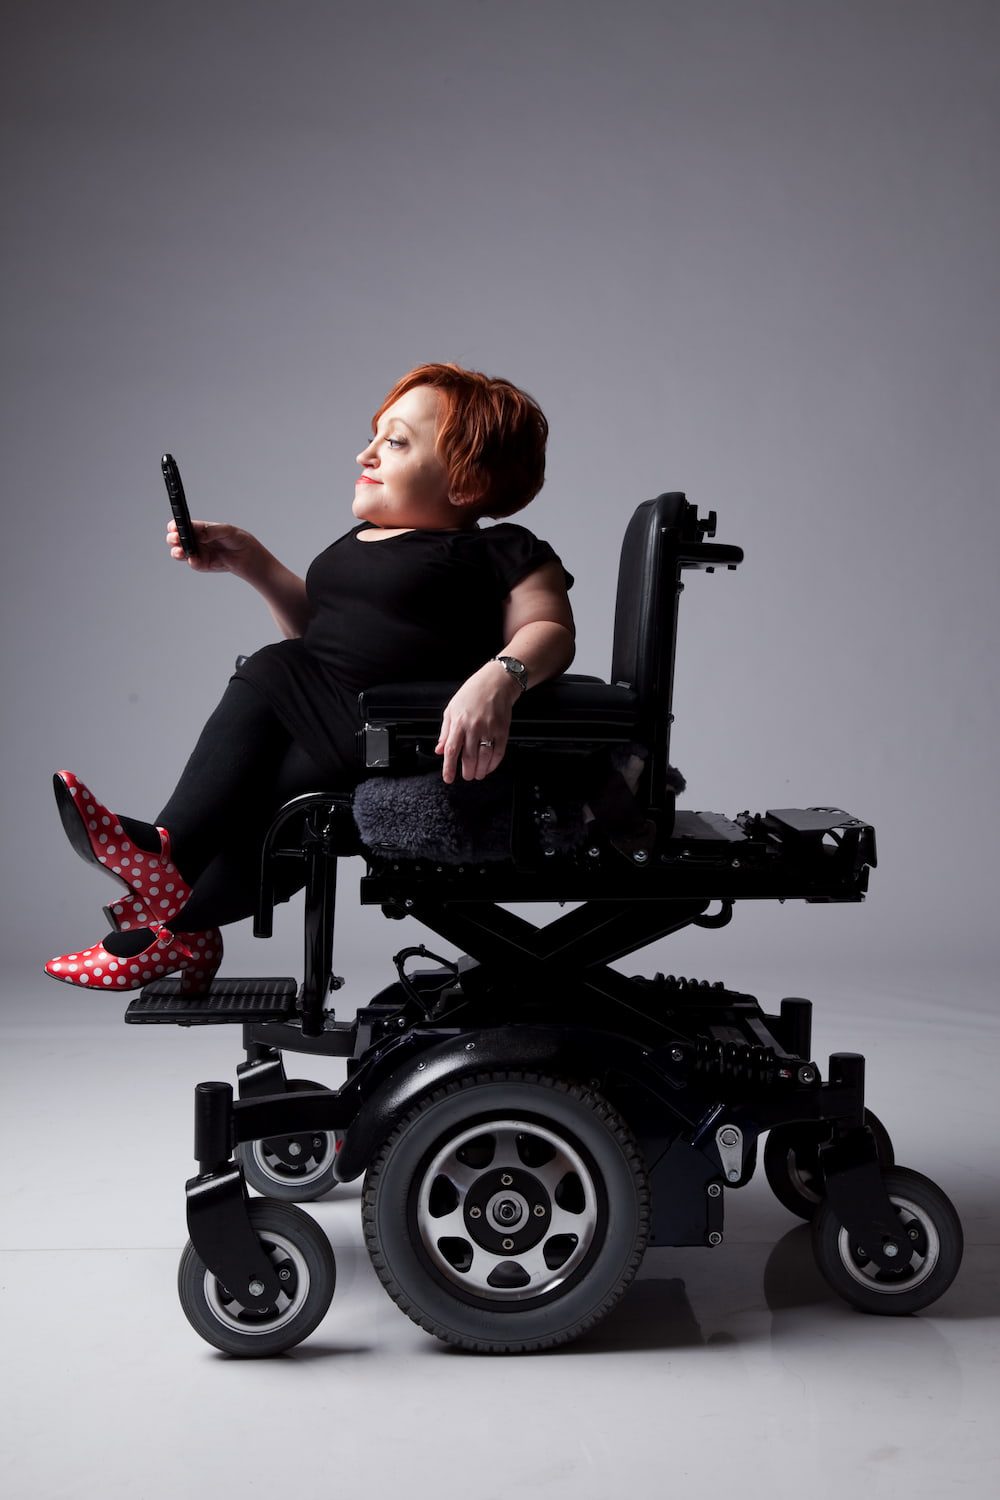 Studio photo of Stella in profile looking at her phone. She's wearing all black except for red shoes with white polka dots.